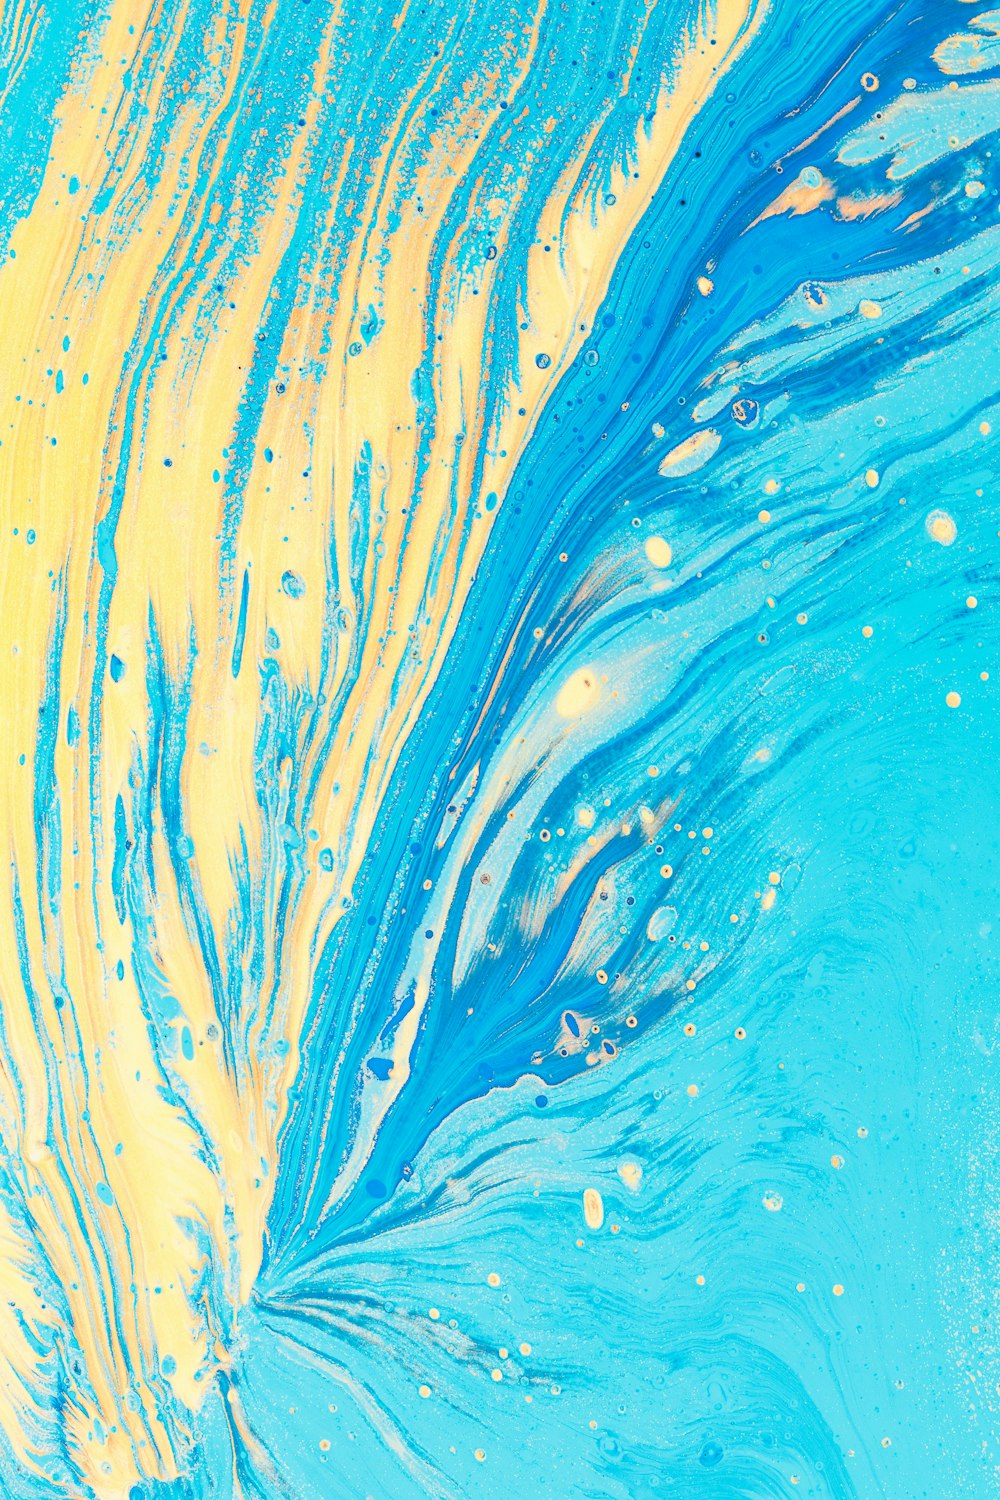 blue and yellow abstract artwork